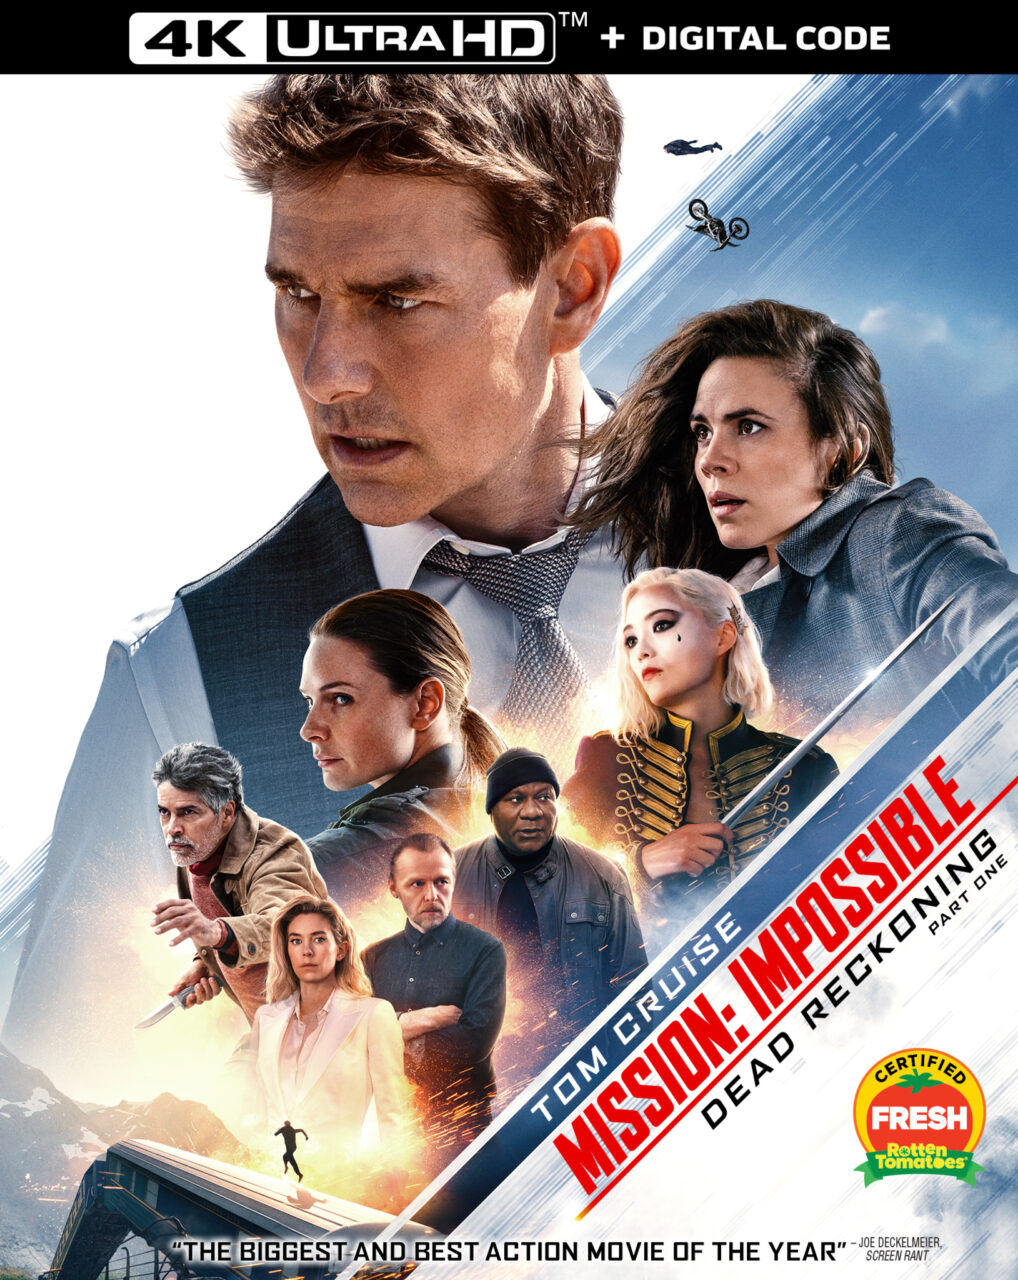 Mission: Impossible - Dead Reckoning Part One 4K Ultra HD Combo Pack cover (Paramount Home Entertainment)